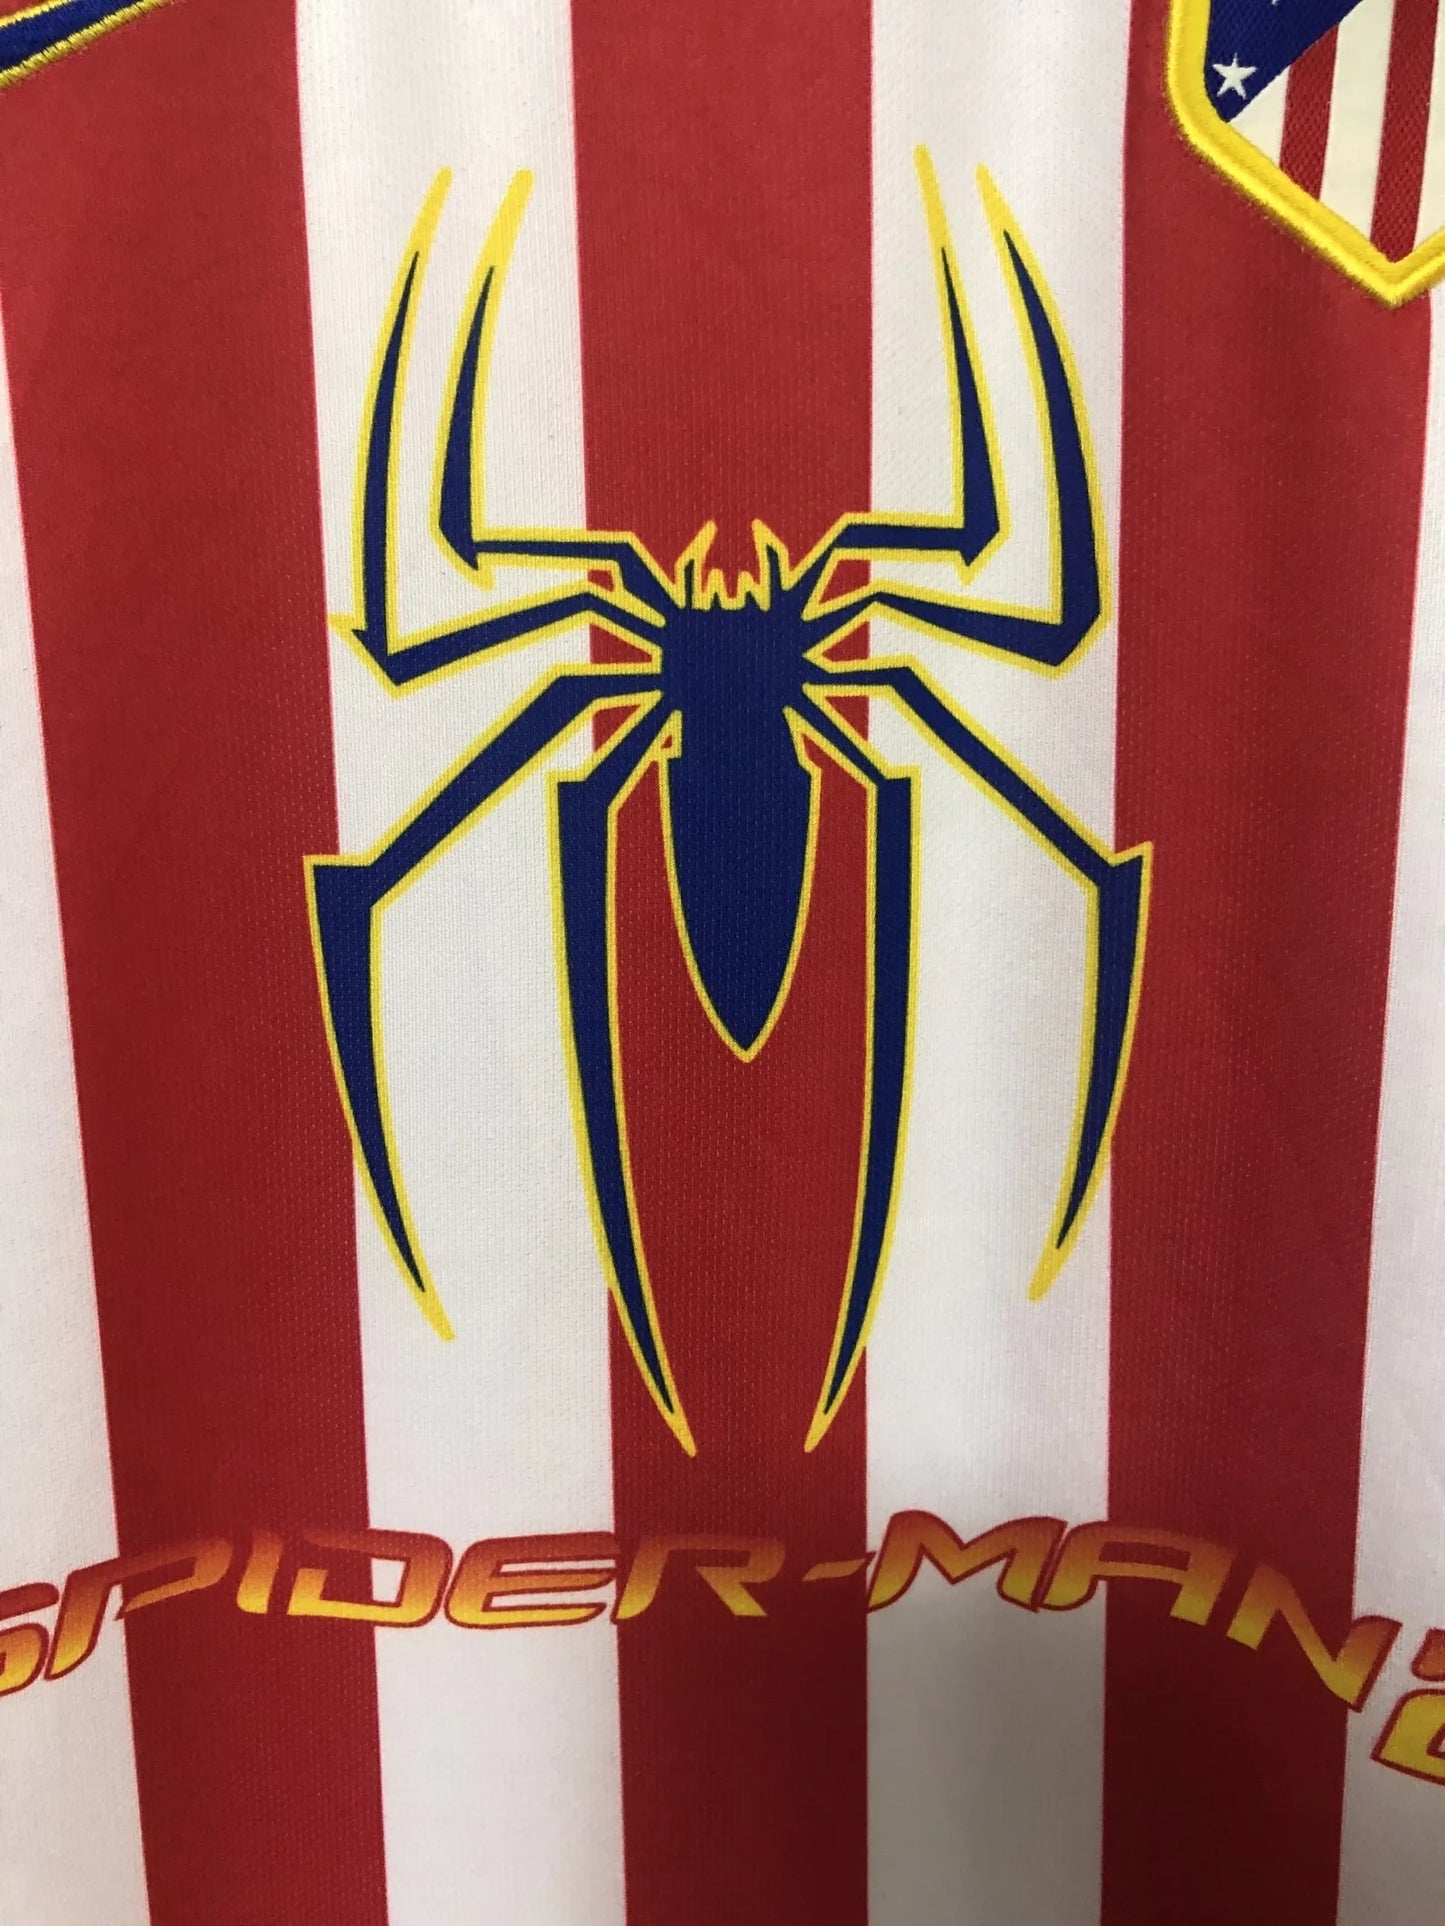 Atletico Madrid Spider Man Home Jersey 2004-2005